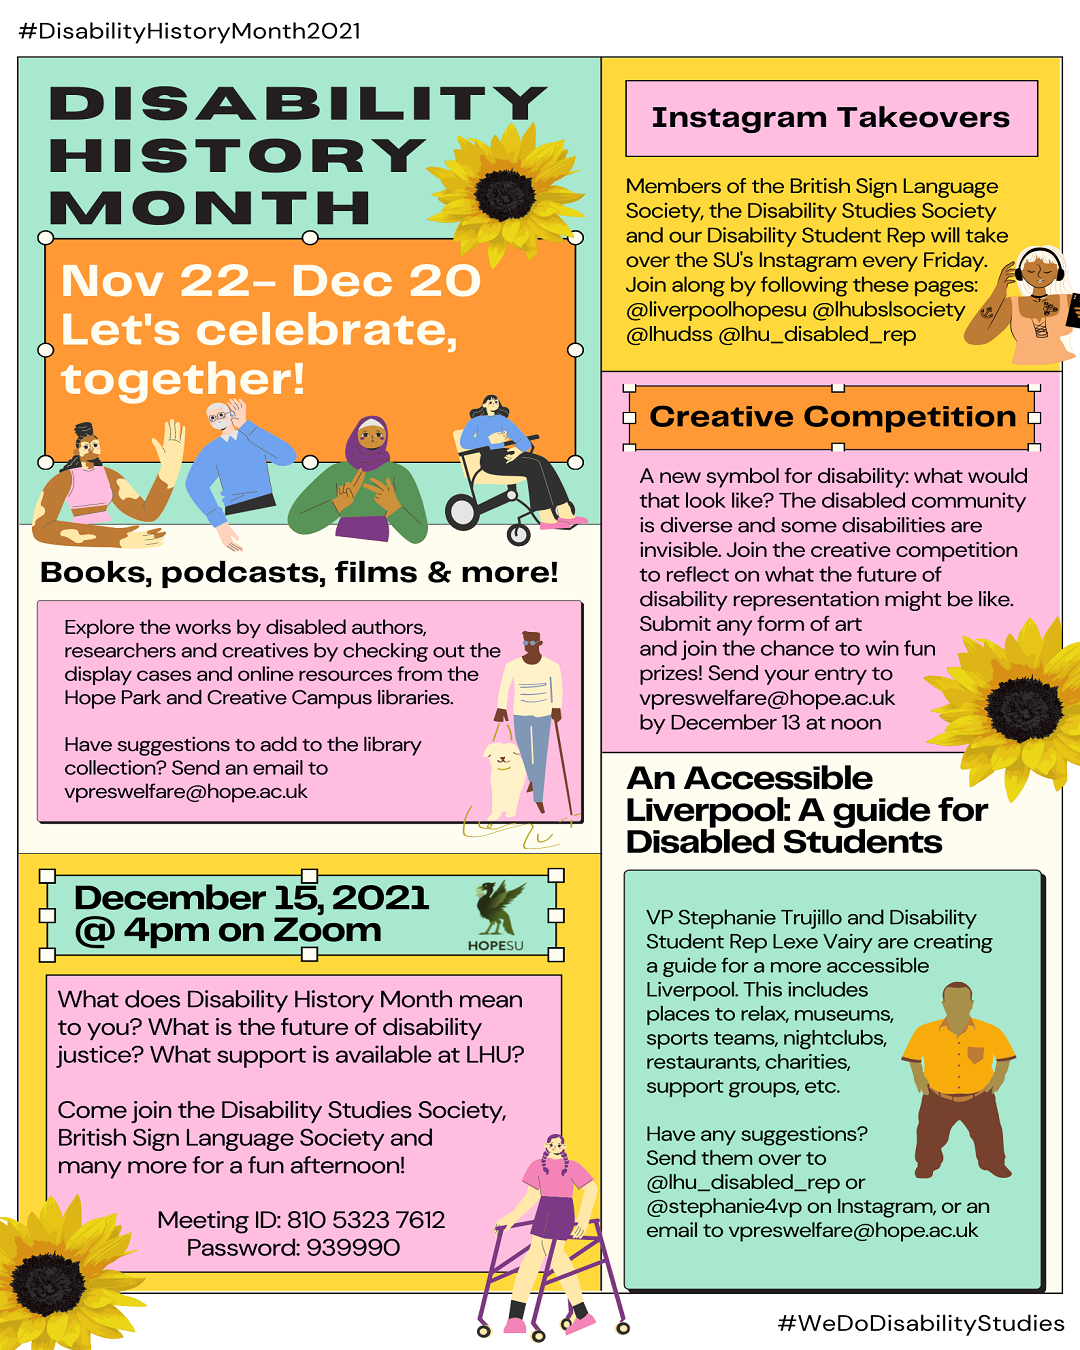 Disability History Month 2021 Infographic